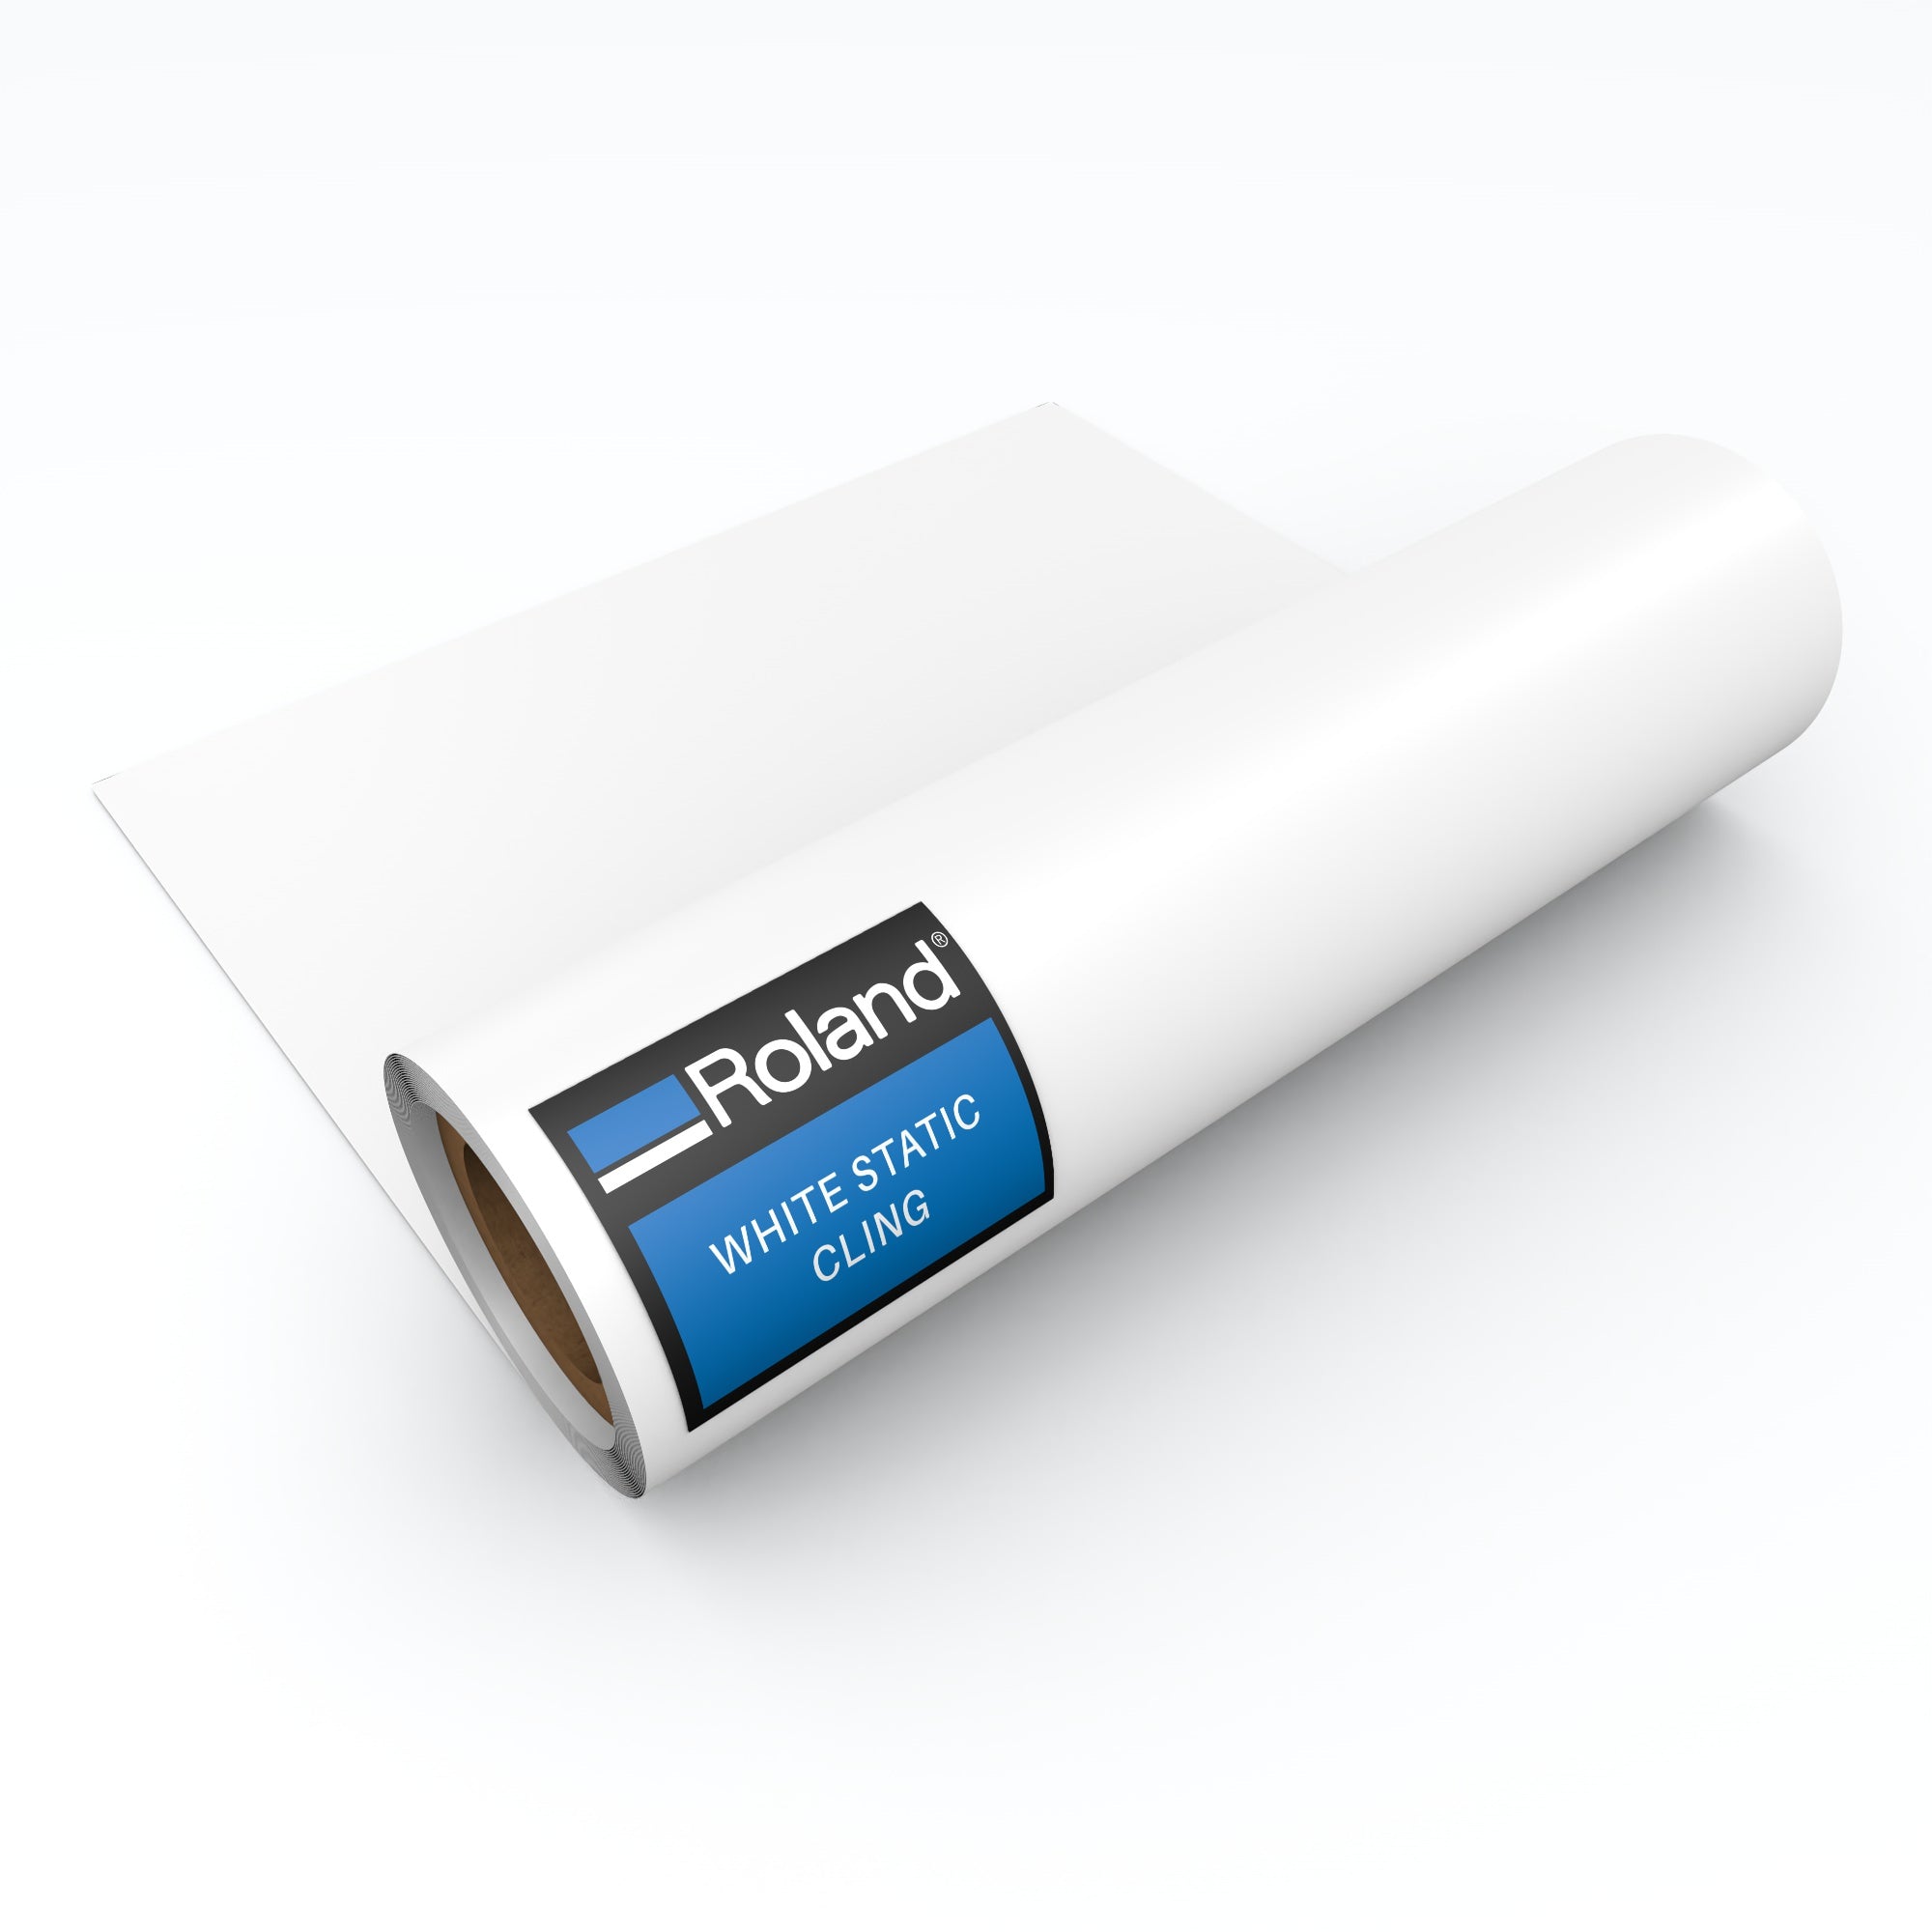 white static cling media from roland 30 inches wide